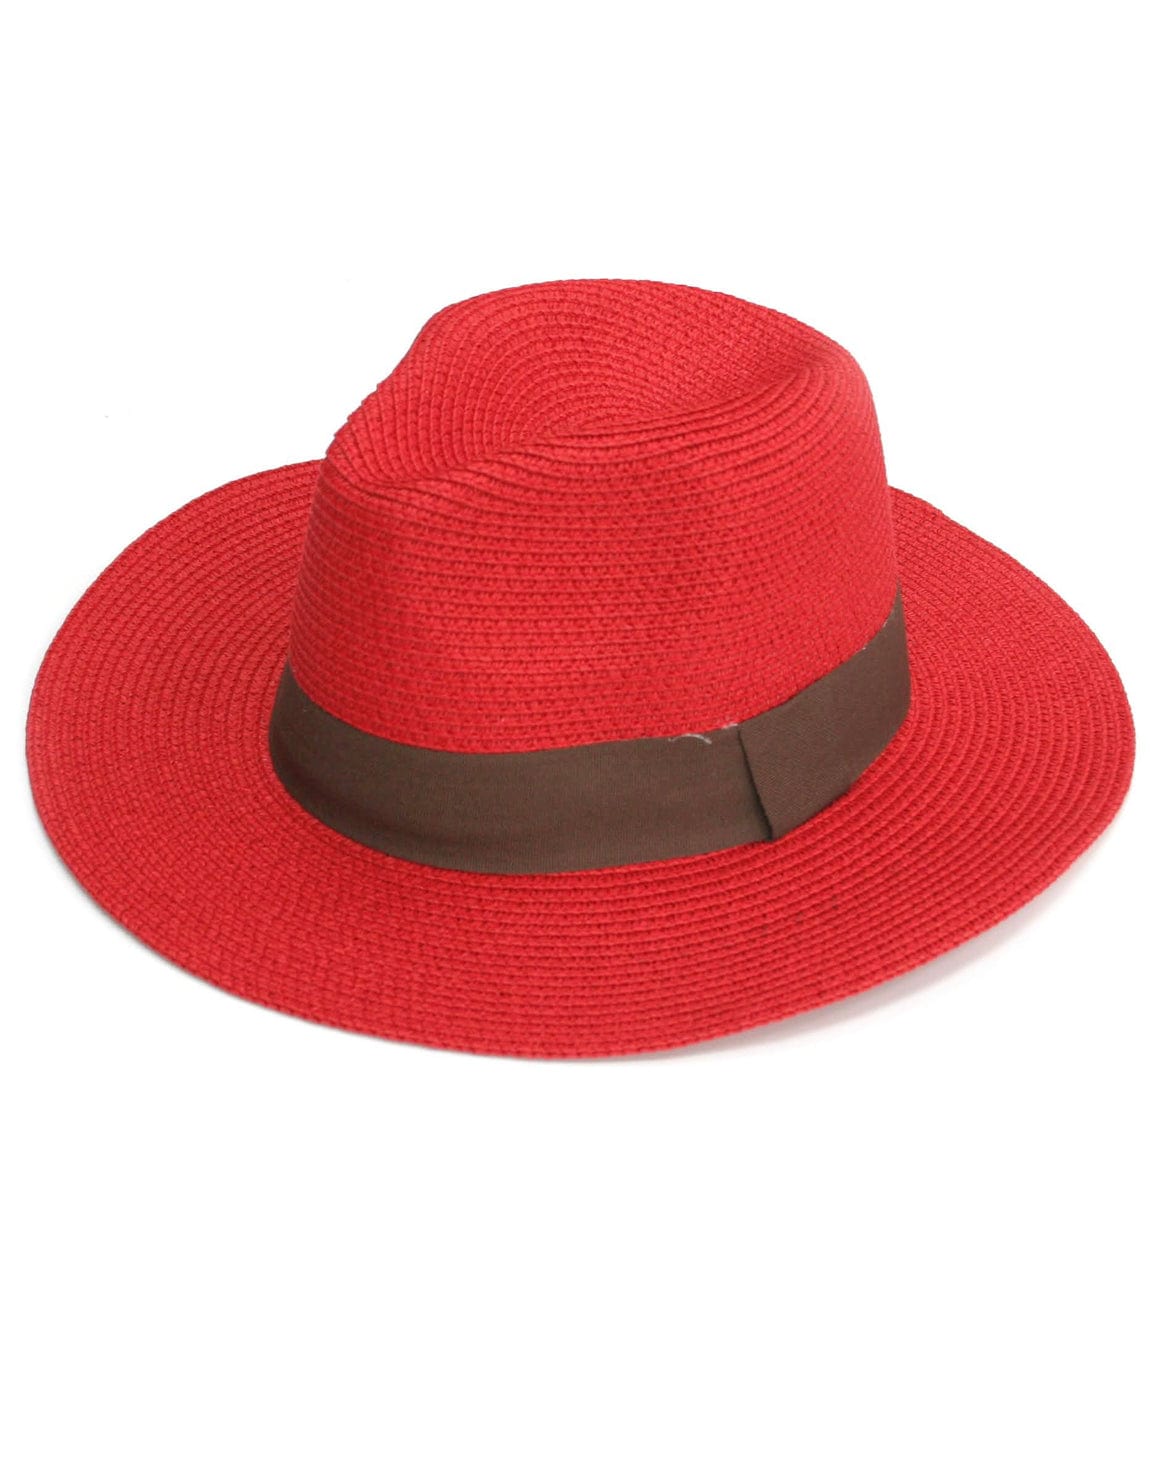 lusciousscarves Hats Red foldable Panama hat , Rollable , packable Sun hat